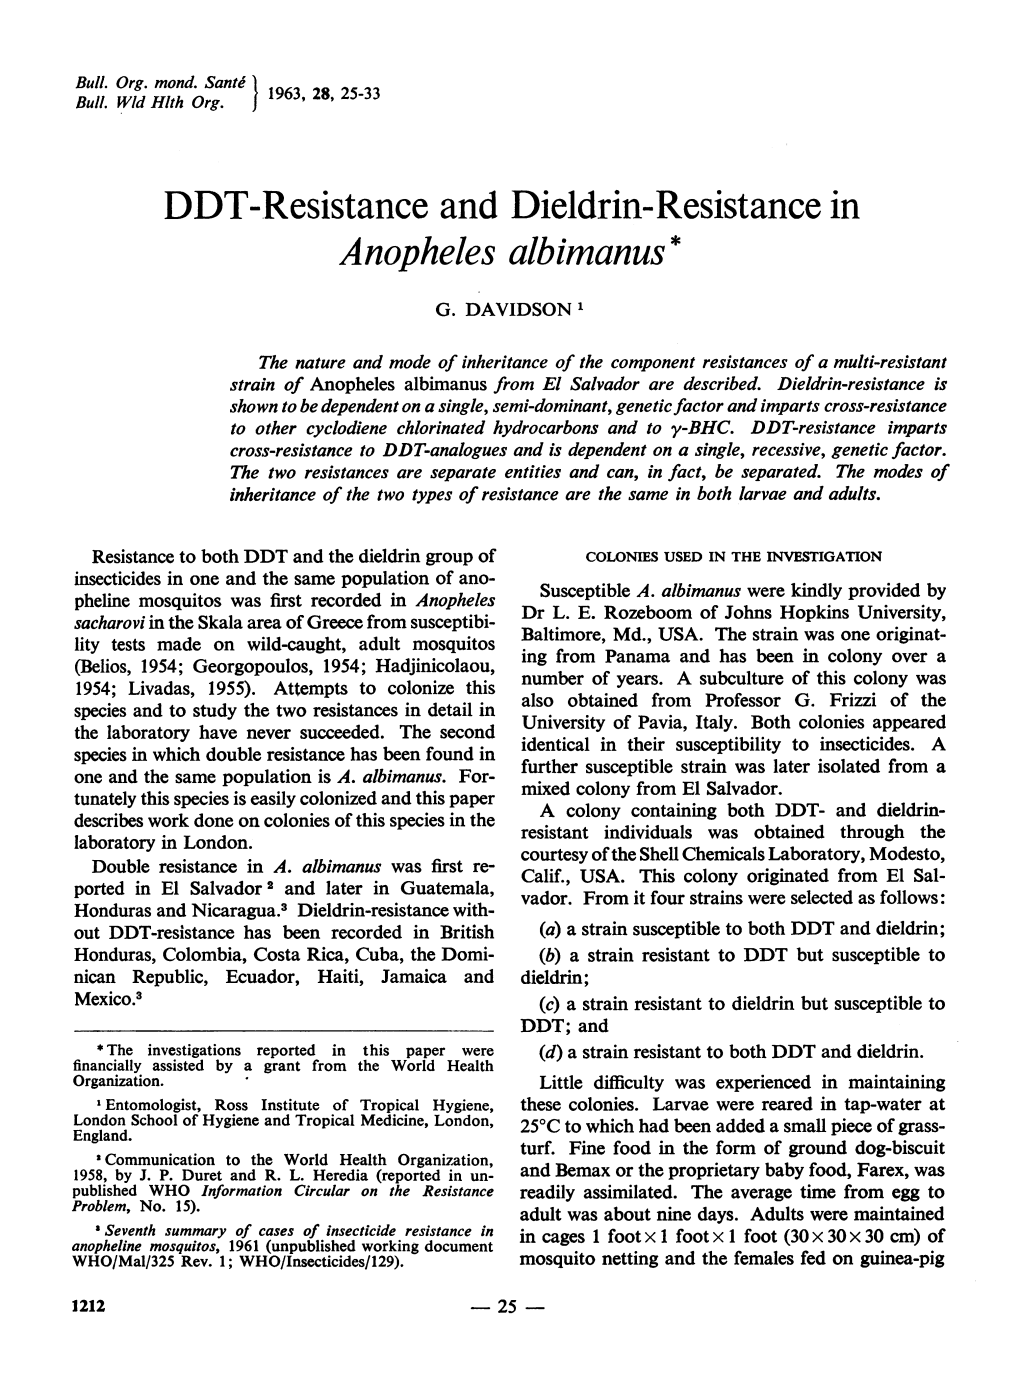 DDT-Resistance and Dieldrin-Resistance in Anopheles Albimanus*